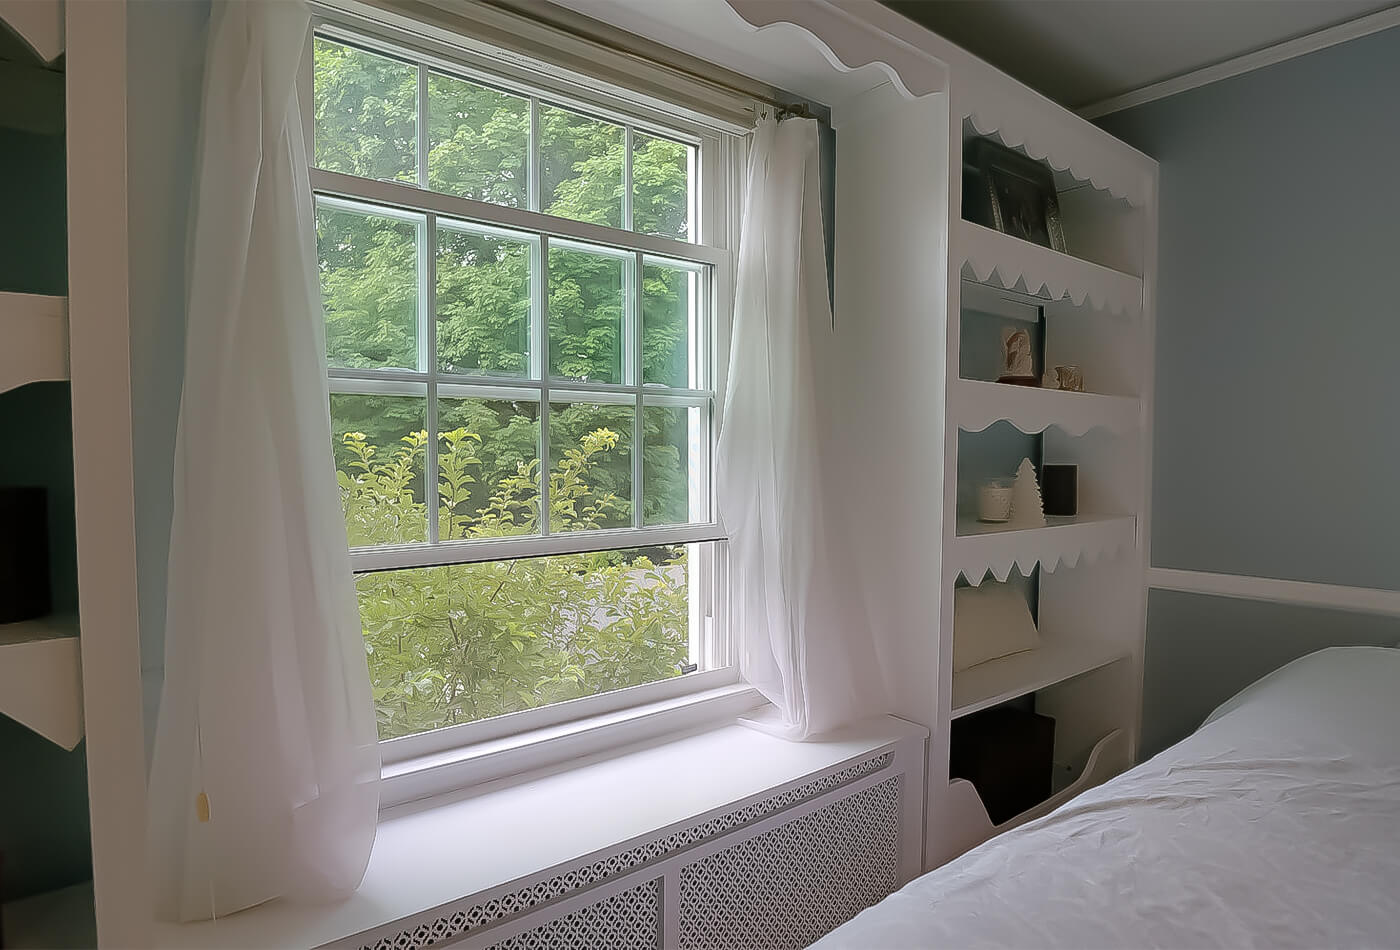 Design Your Dream Window Nook With These Top Design Tricks